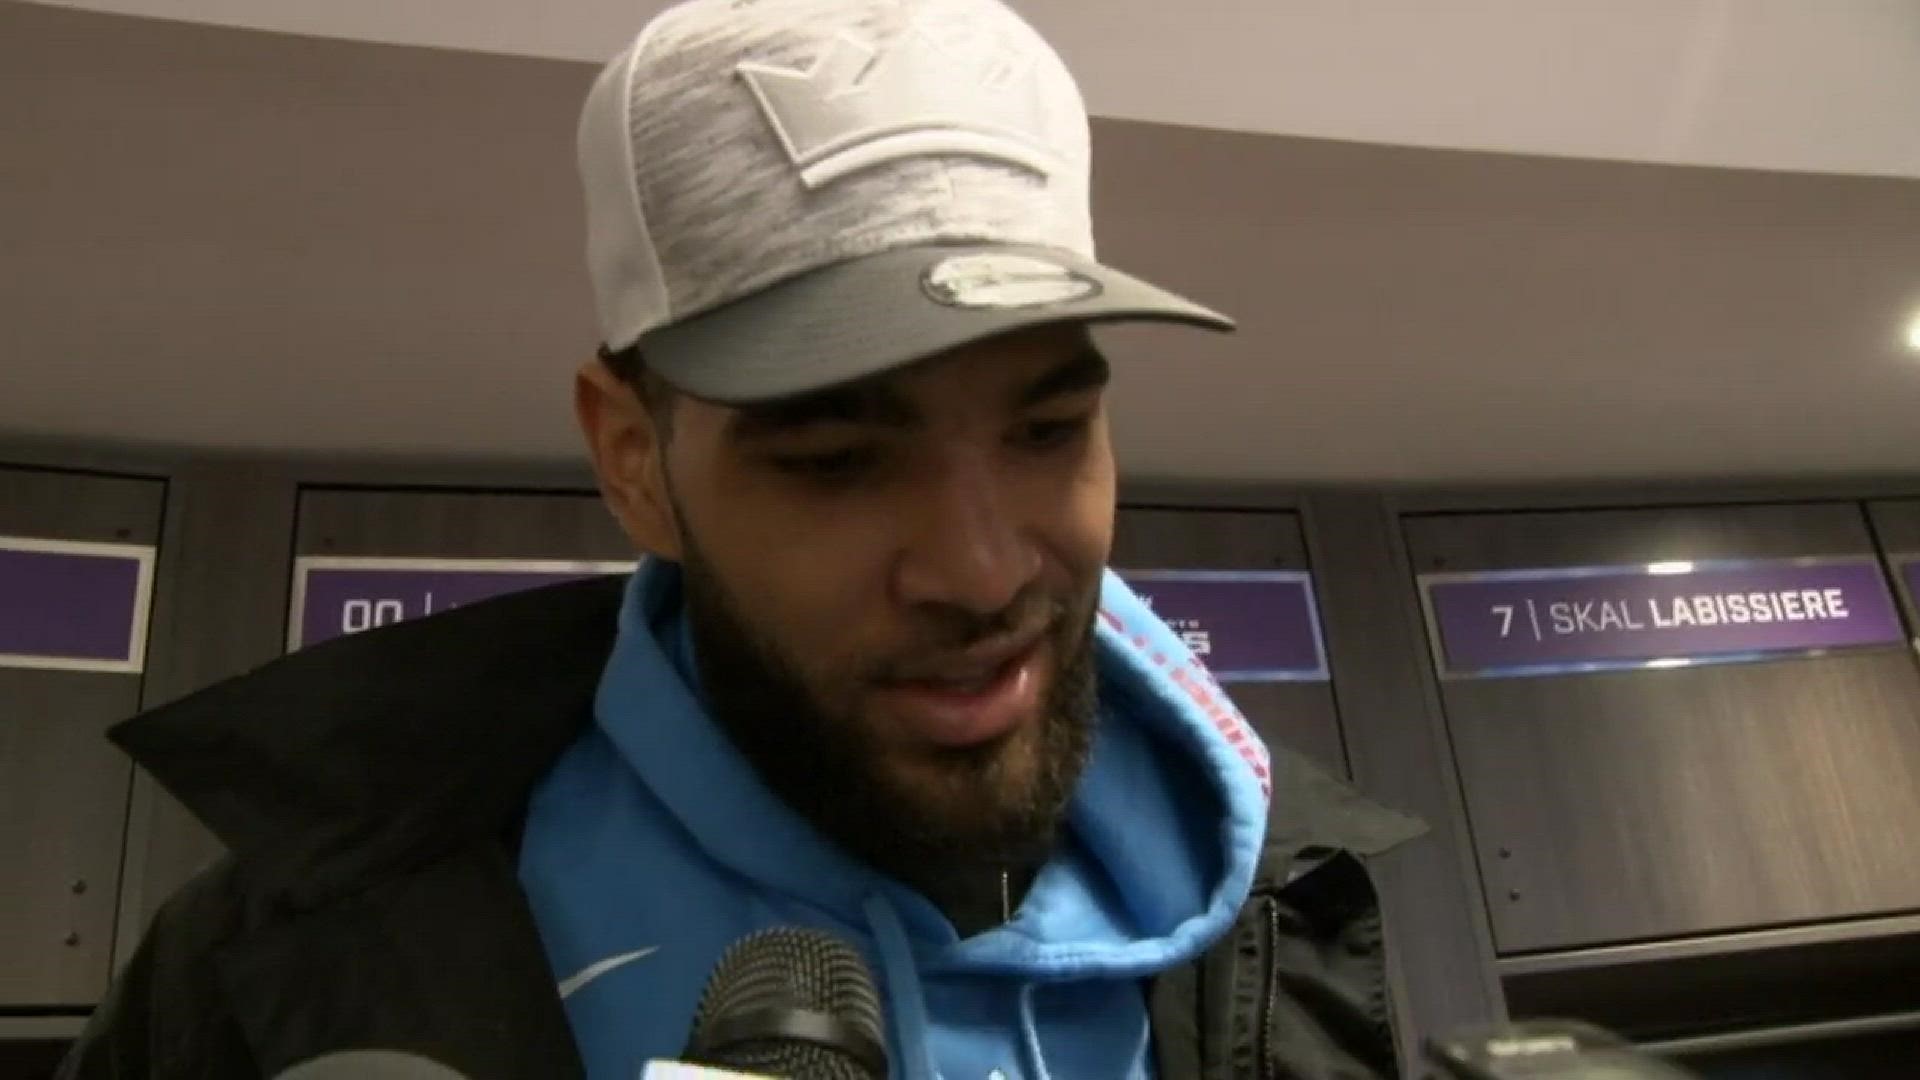 Kings center Willie Cauley-Stein discusses his strategy in trying to defend his former Kentucky teammate Karl-Anthony Towns, following Monday's loss to the Minnesota Timberwolves.